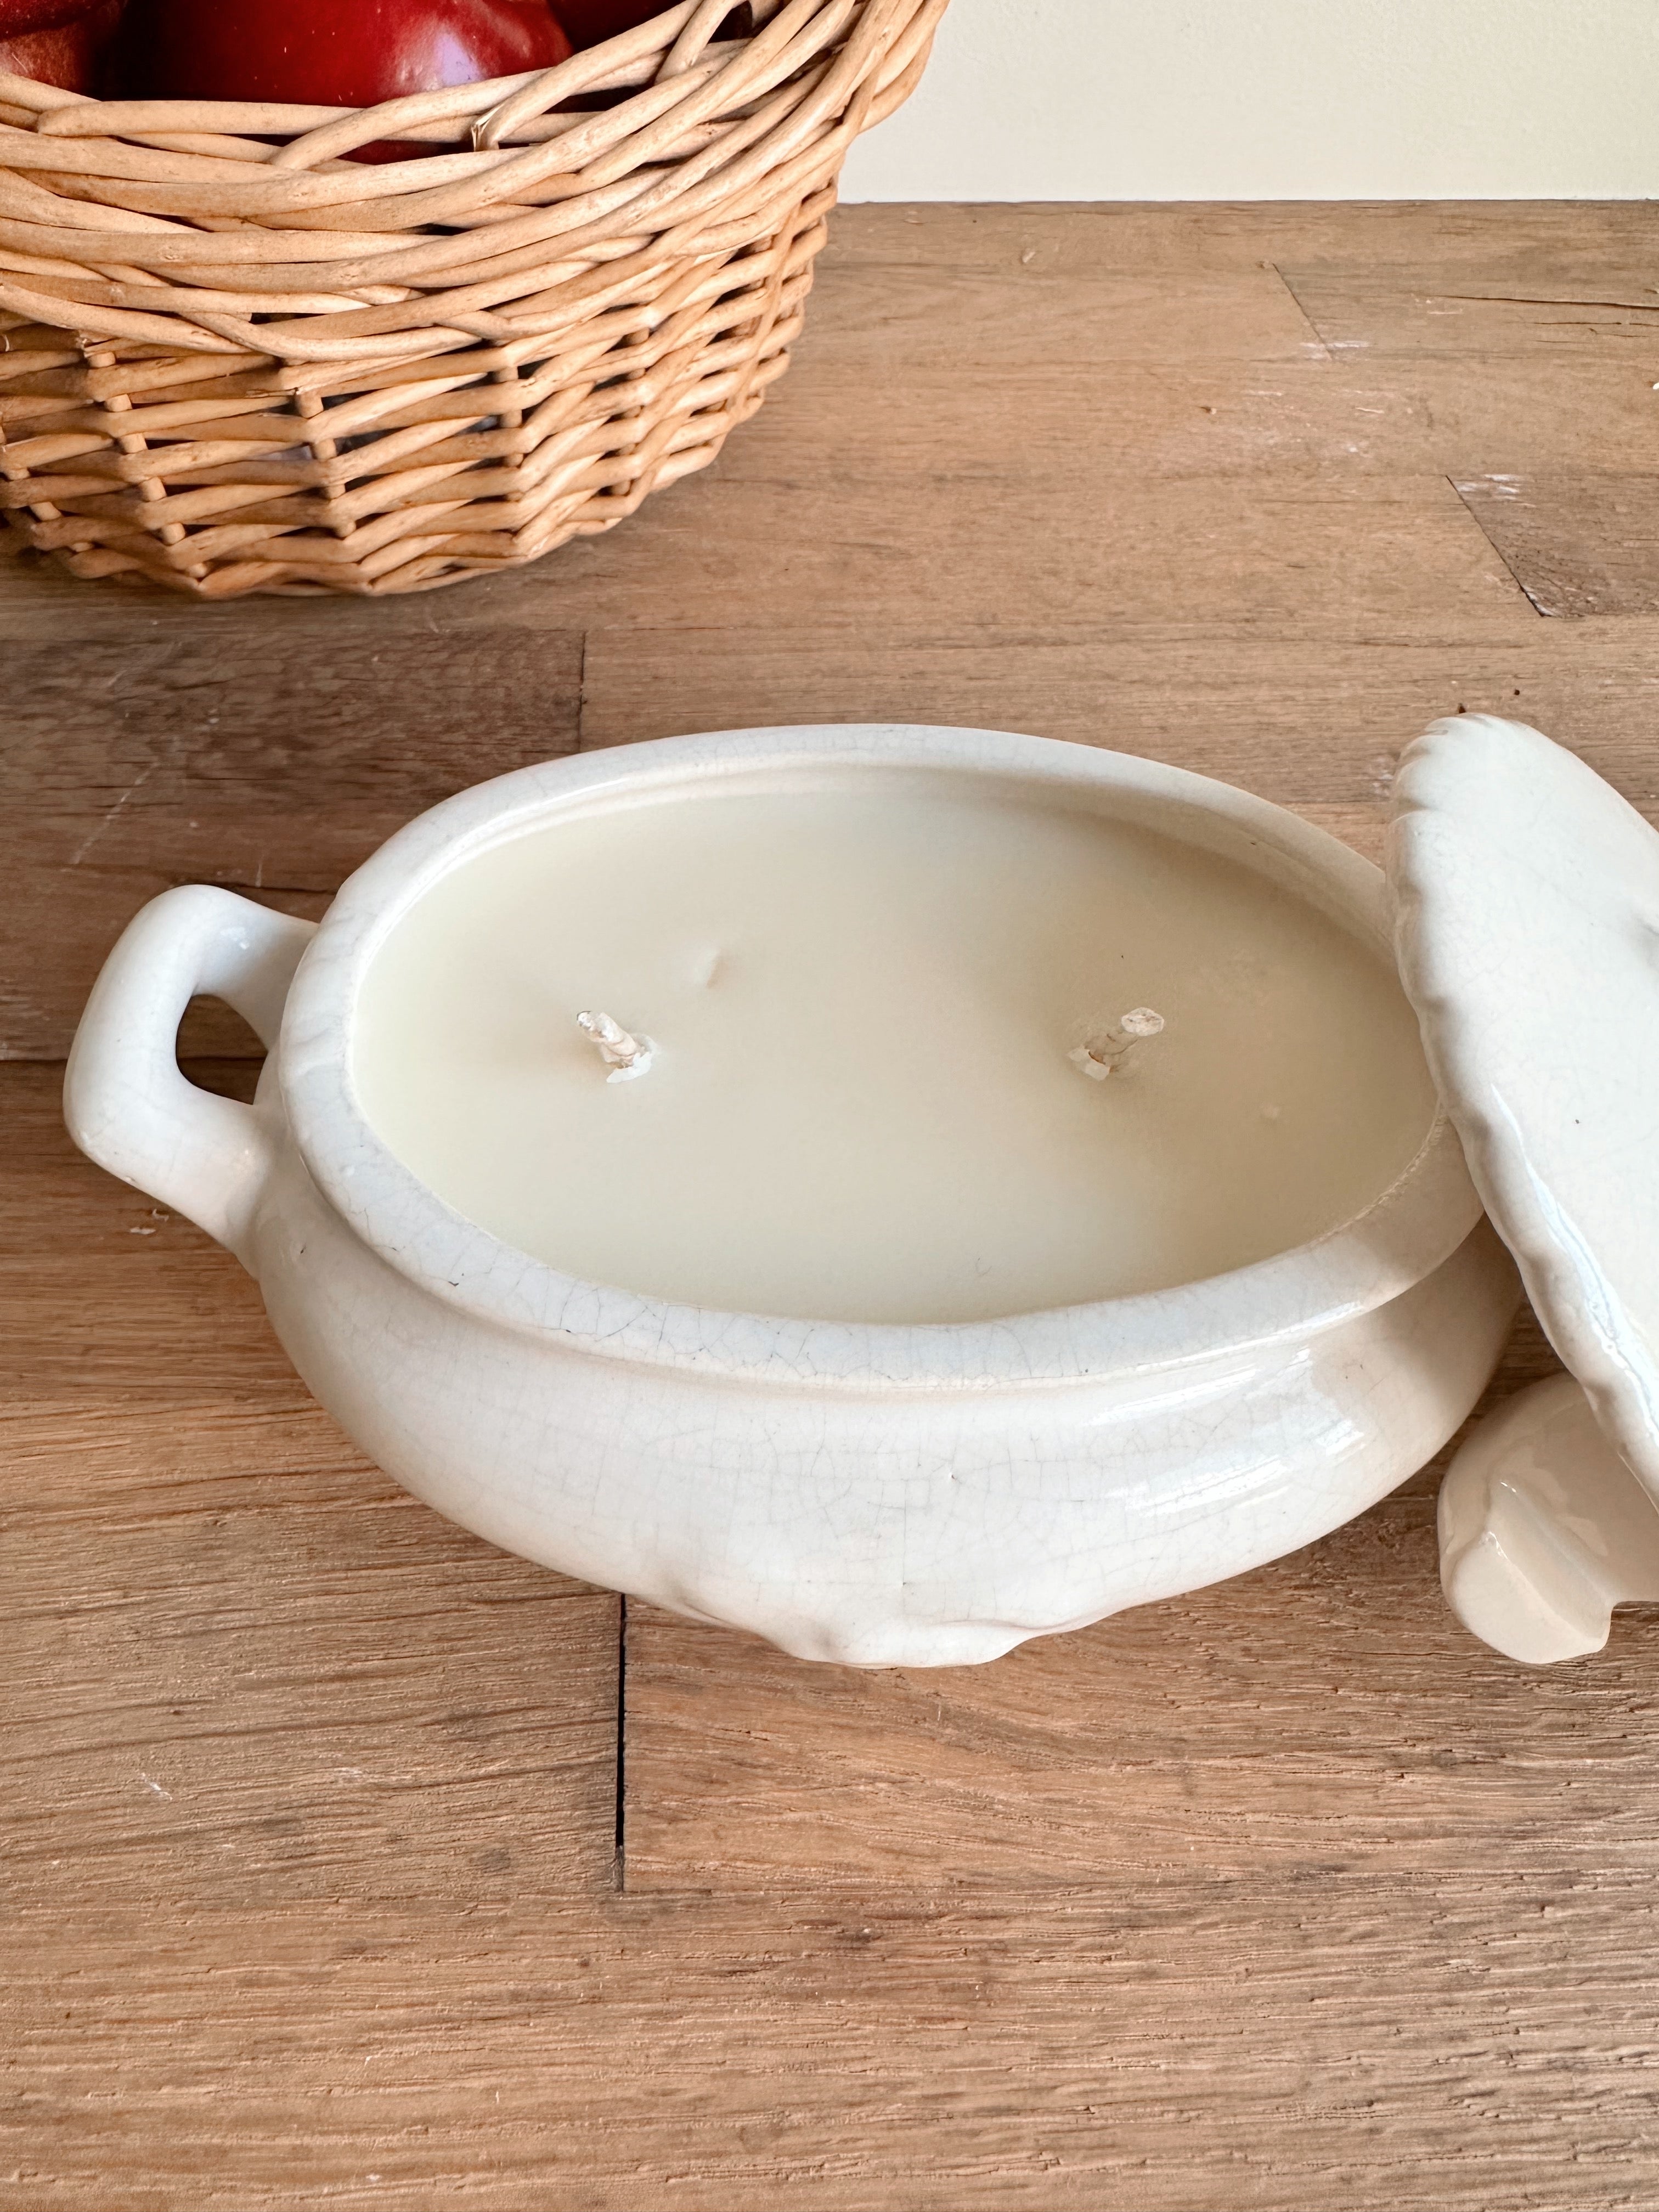 Hand Poured Apple Orchard Candle in a Vintage Stoneware Covered Dish